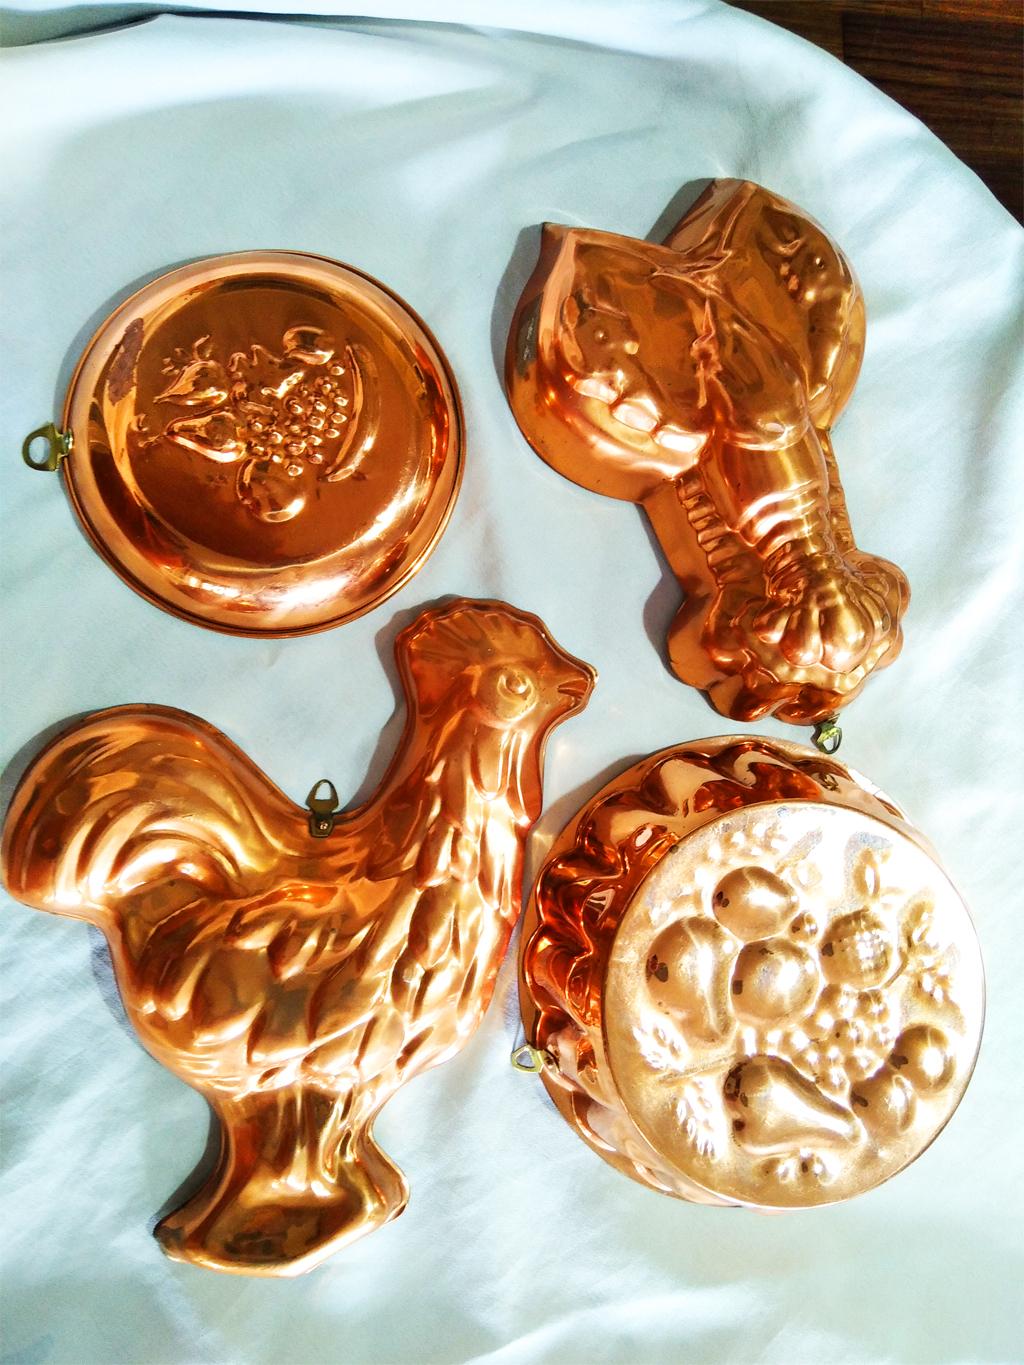 The price is for the lot of 4 molds
Vintage copper molds with tin-plated interior

Ideal molds to hang as an ornament in a rustic kitchen.
  